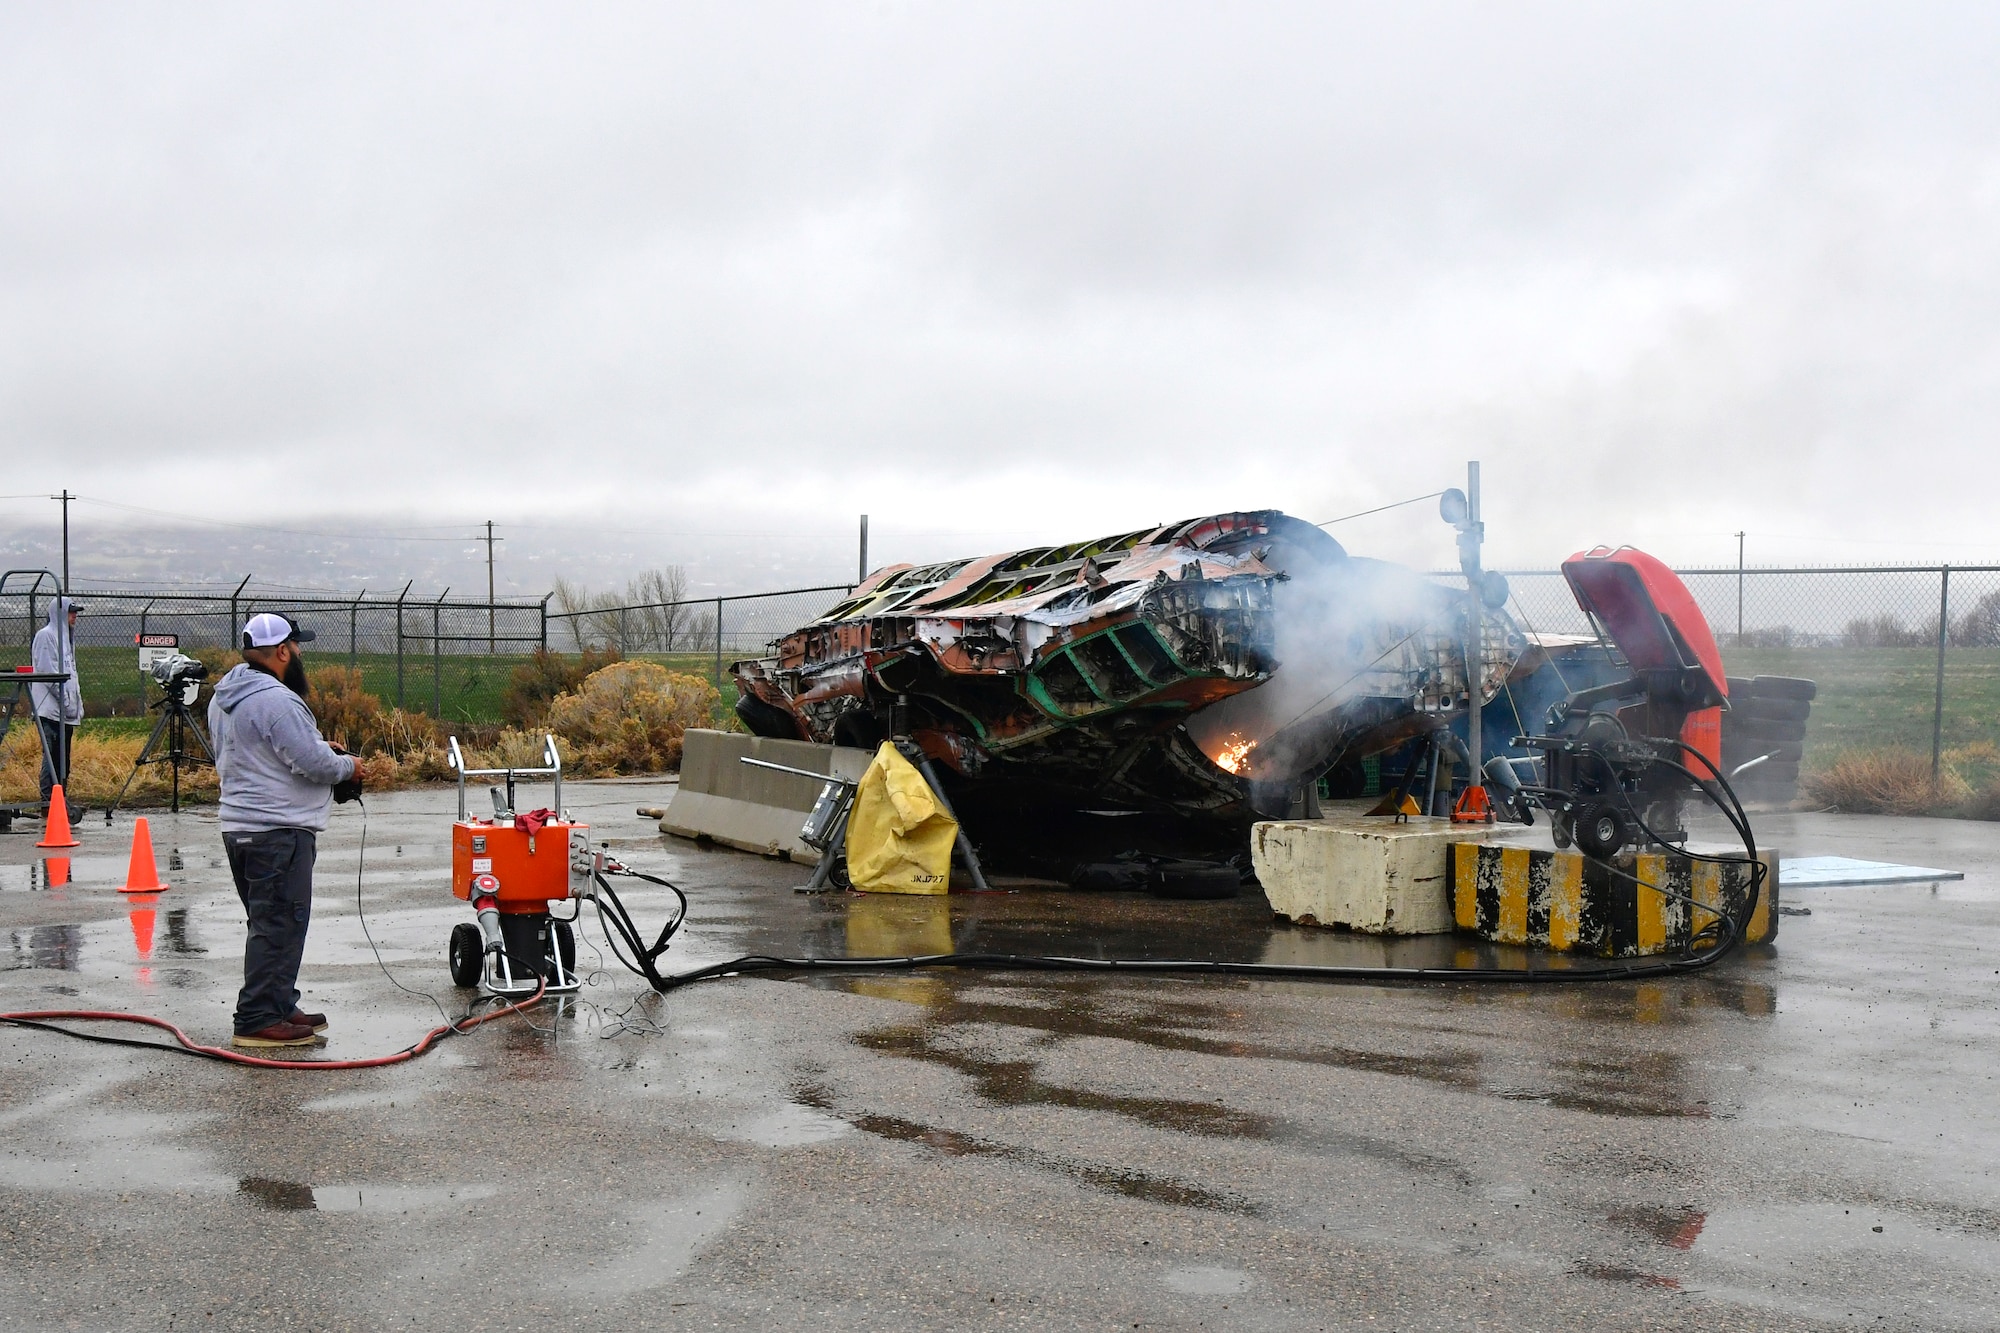 A salvaged F-35A is cut in half with the volunteer help of a civilian saw manufacturing company March 31, 2022, at Hill Air Force Base, Utah. The aircraft was condemned after an accident and is currently being transformed into sectional training aids by the 372nd Training Squadron, Det. 3, for use during instruction of F-35 maintainers. (U.S. Air Force photo by Todd Cromar)